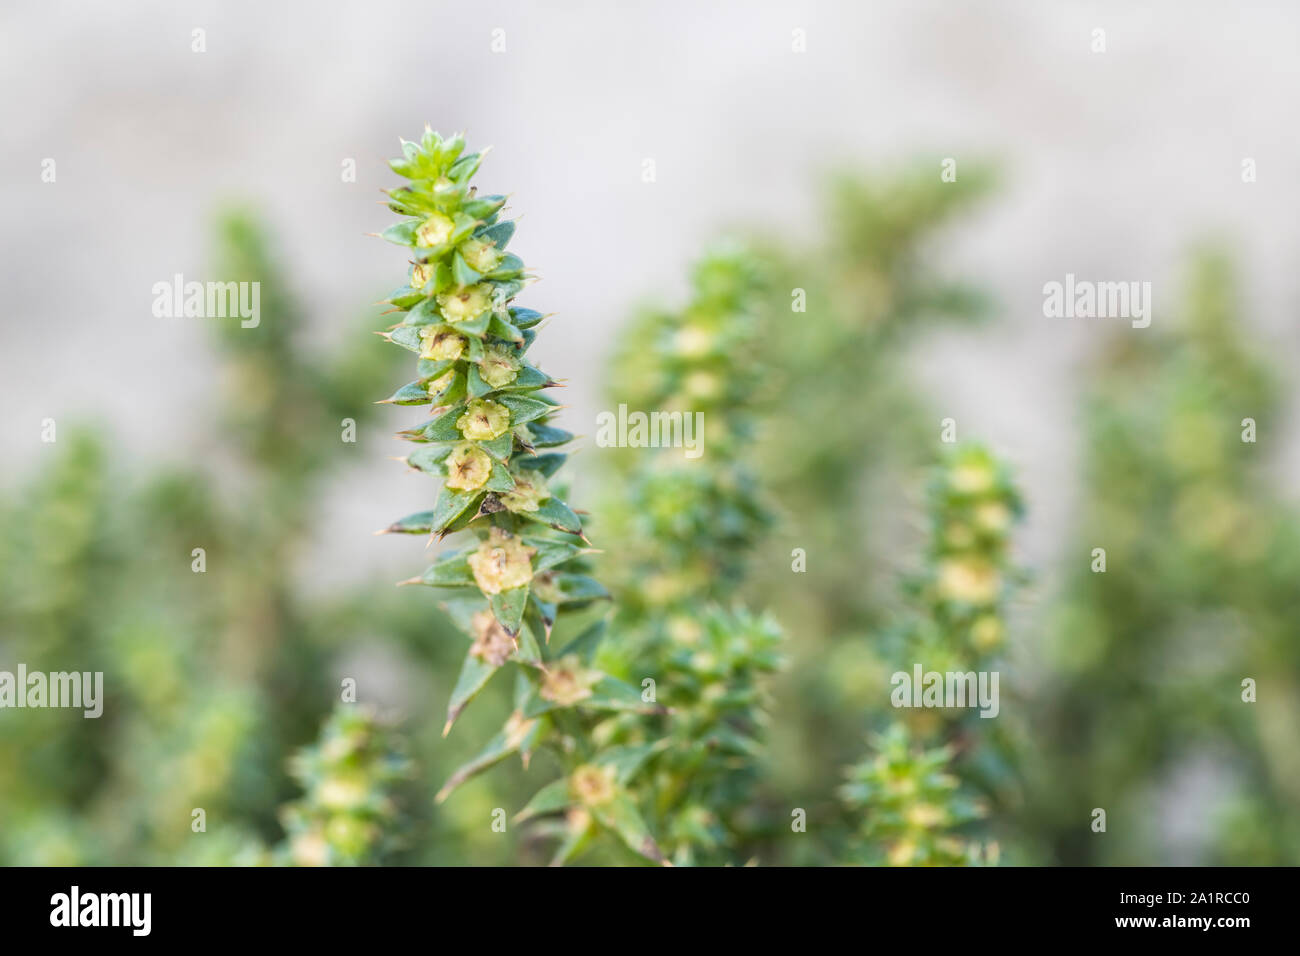 Flowers and autumn (September) foliage / leaves of Prickly Saltwort / Salsola kali on a sandy beach. Once used as a source of soda in glass-making. Stock Photo